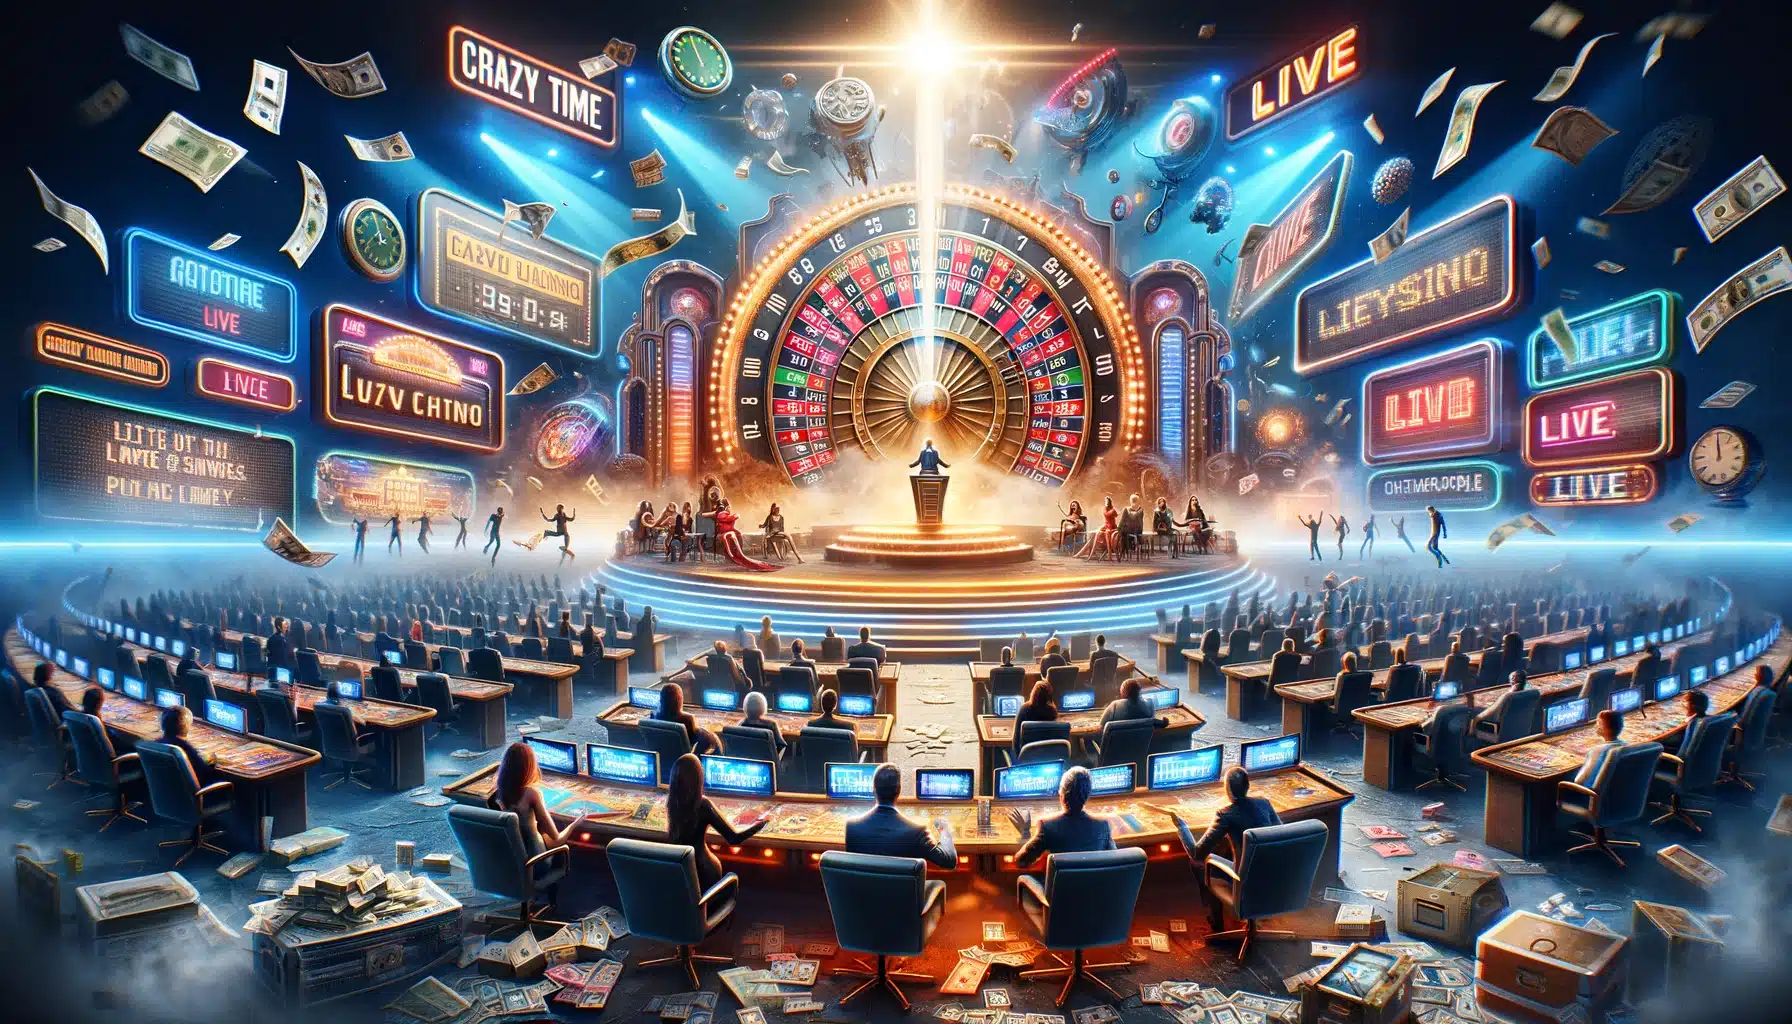 The Evolution of Live Game Shows and the Role of Crazy Time Live Casino